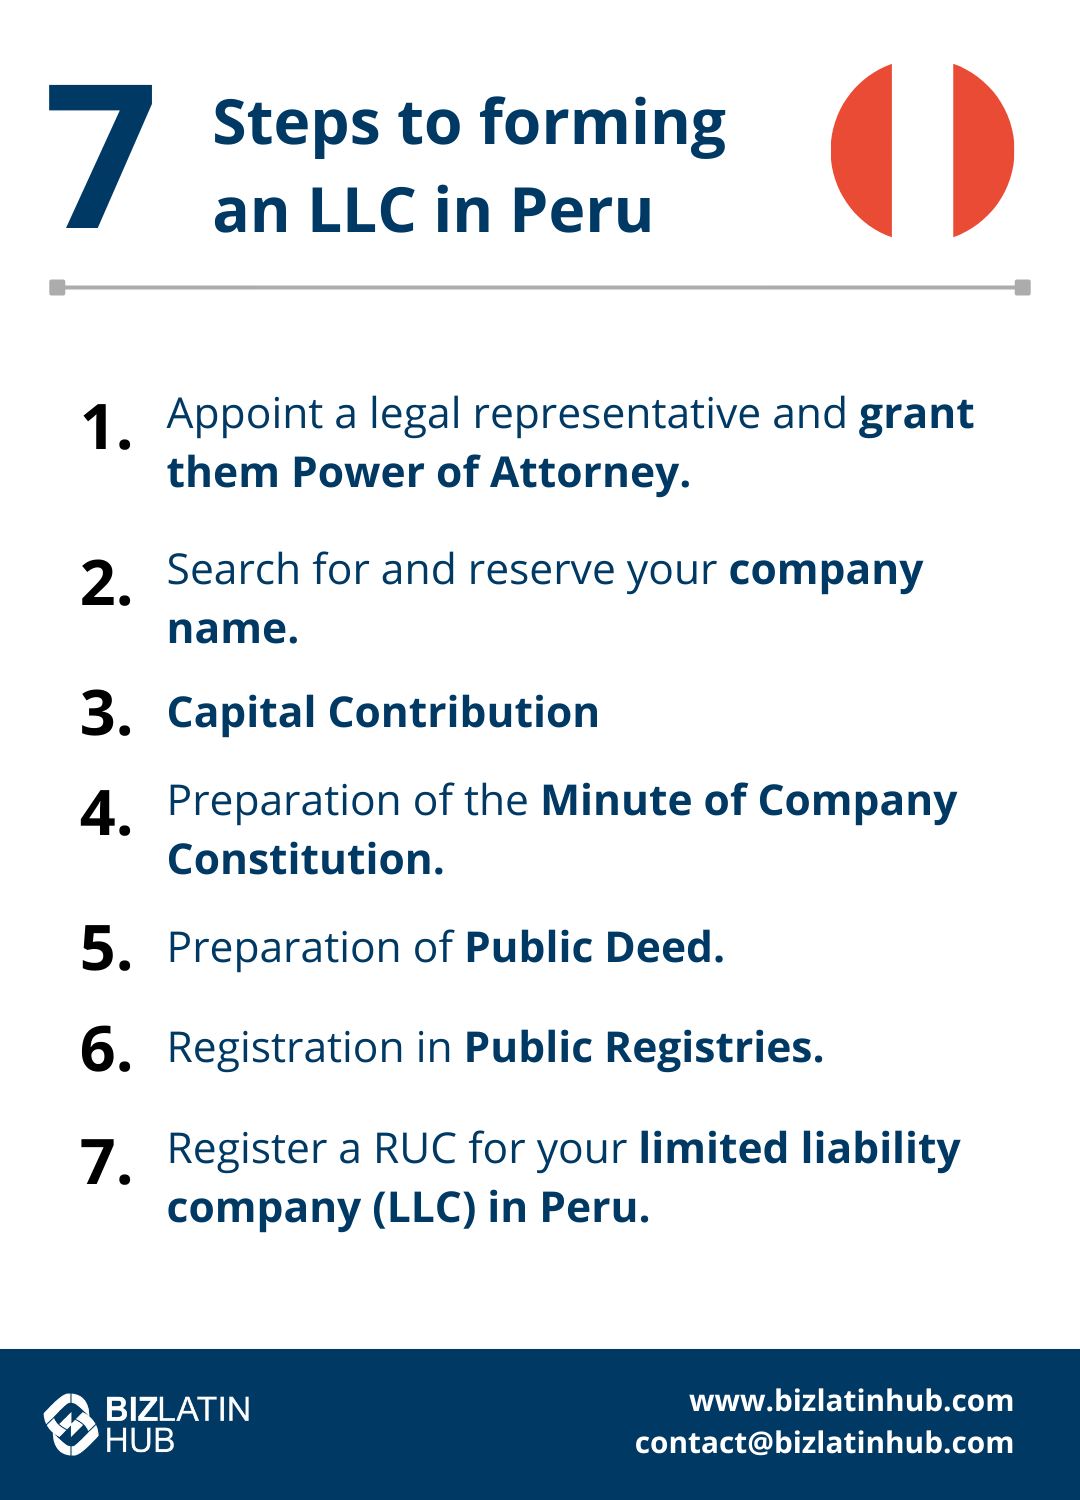 7 Steps to forming an LLC in Peru